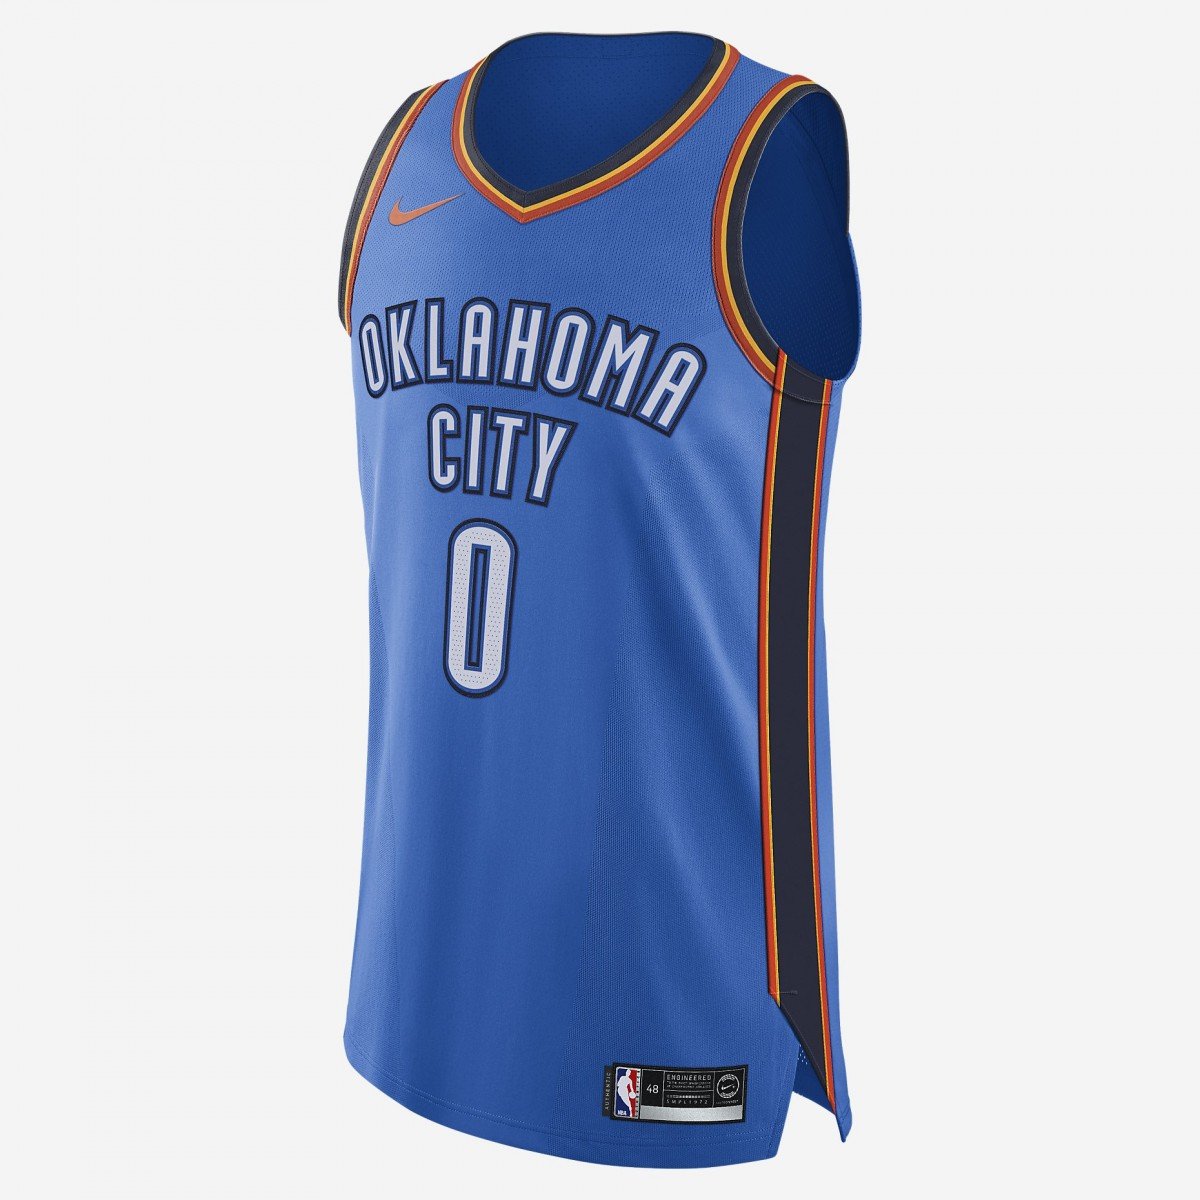 Russell Westbrook IconEdition Authentic Jersey - Oklahoma City Thunder